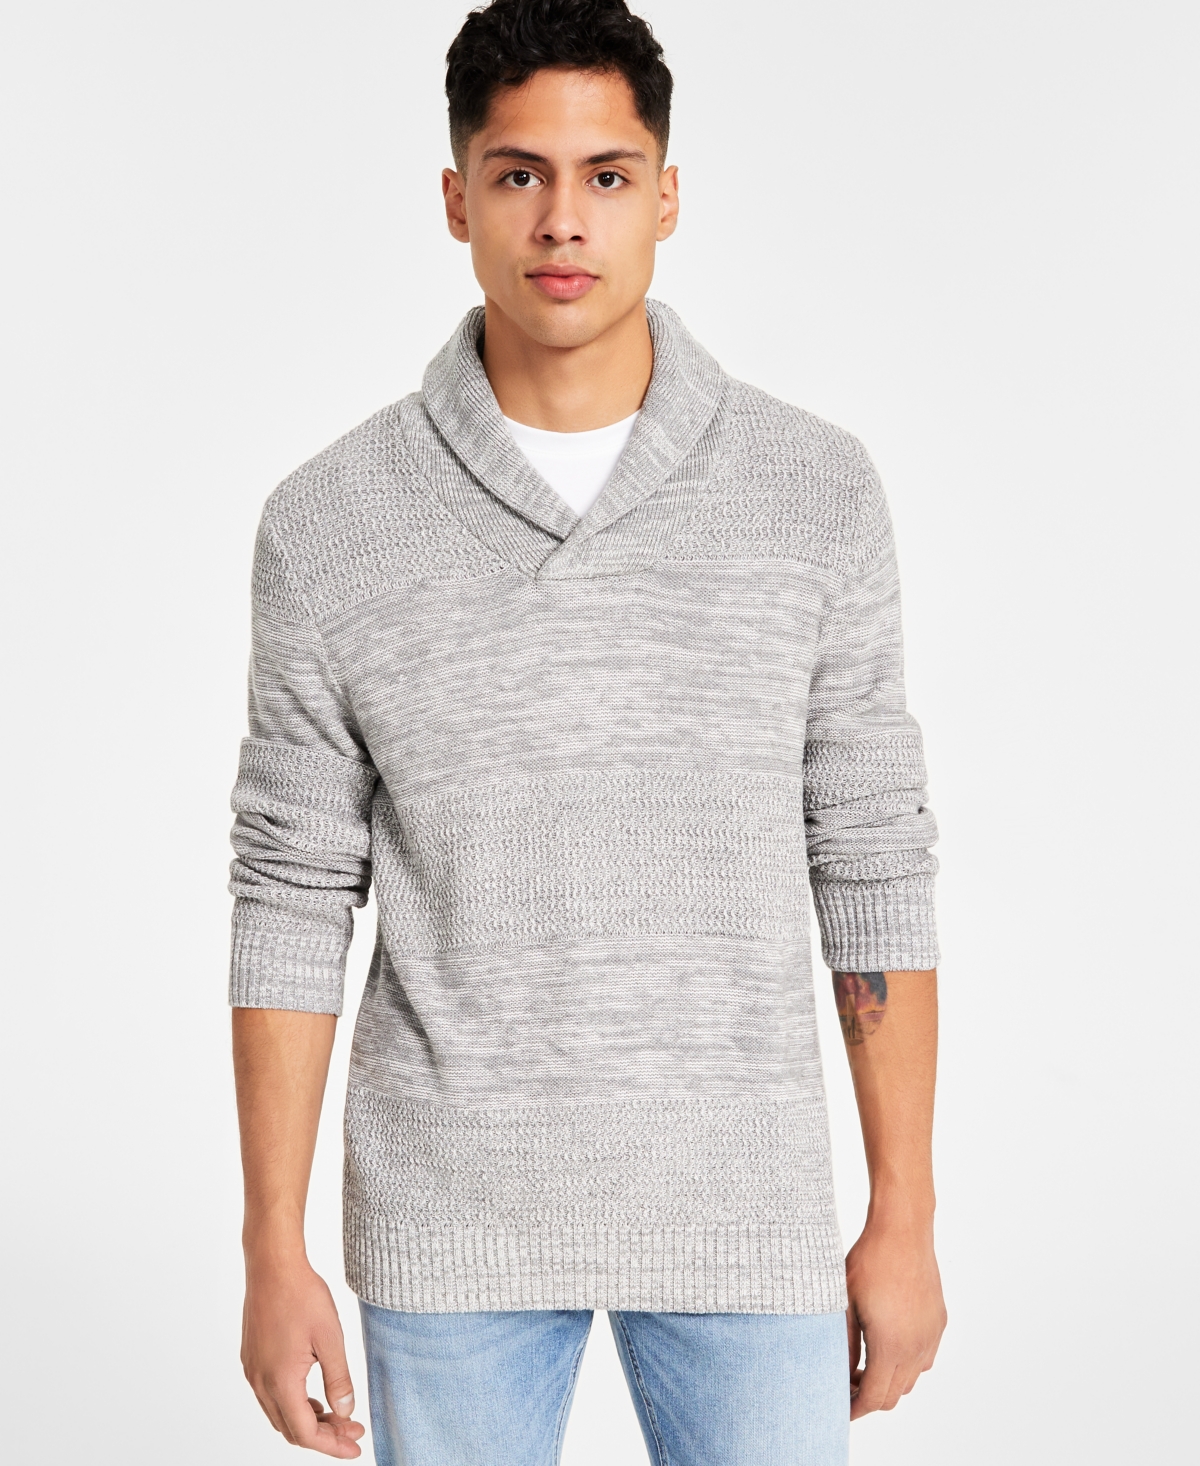 Men's Shawl-Collar Sweater, Created for Macy's - Pewter